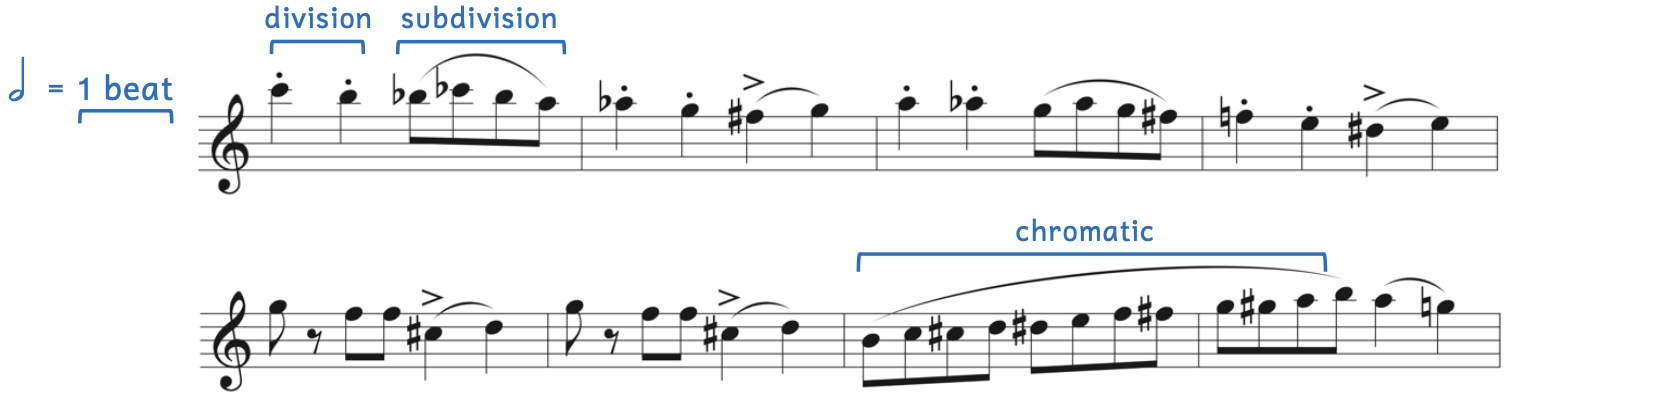 Example of Fučik's Einzug Der Gladiatoren. A half note equals one beat. The first two quarter notes are an example of the division of the beat. The next four eighth notes are an example of the subdivision of the beat. In the second system, there is an example of an almost complete chromatic scale from B4 to A5.